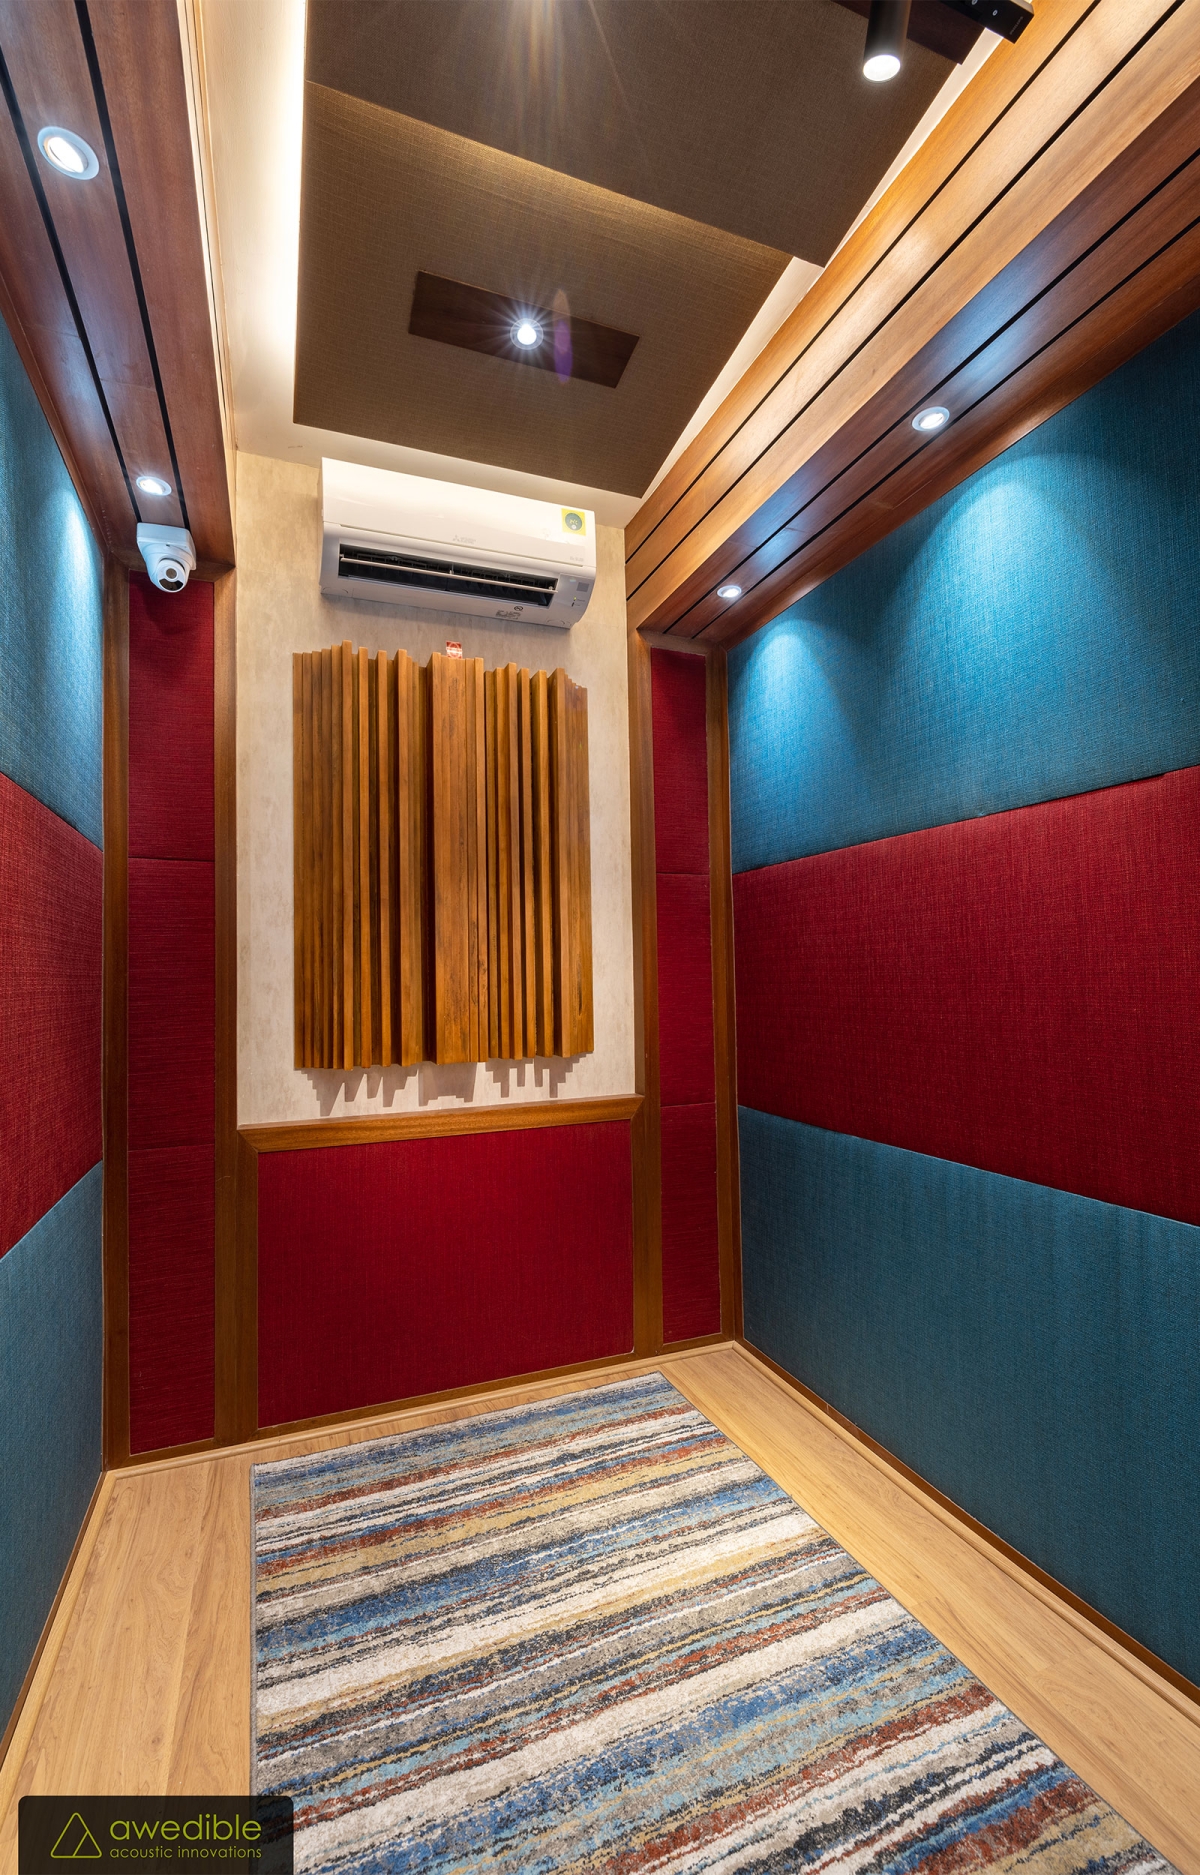 do Recording, Songwriting, Singing, Music Production, Mixing, Mastering, 5.1, and VoiceOver